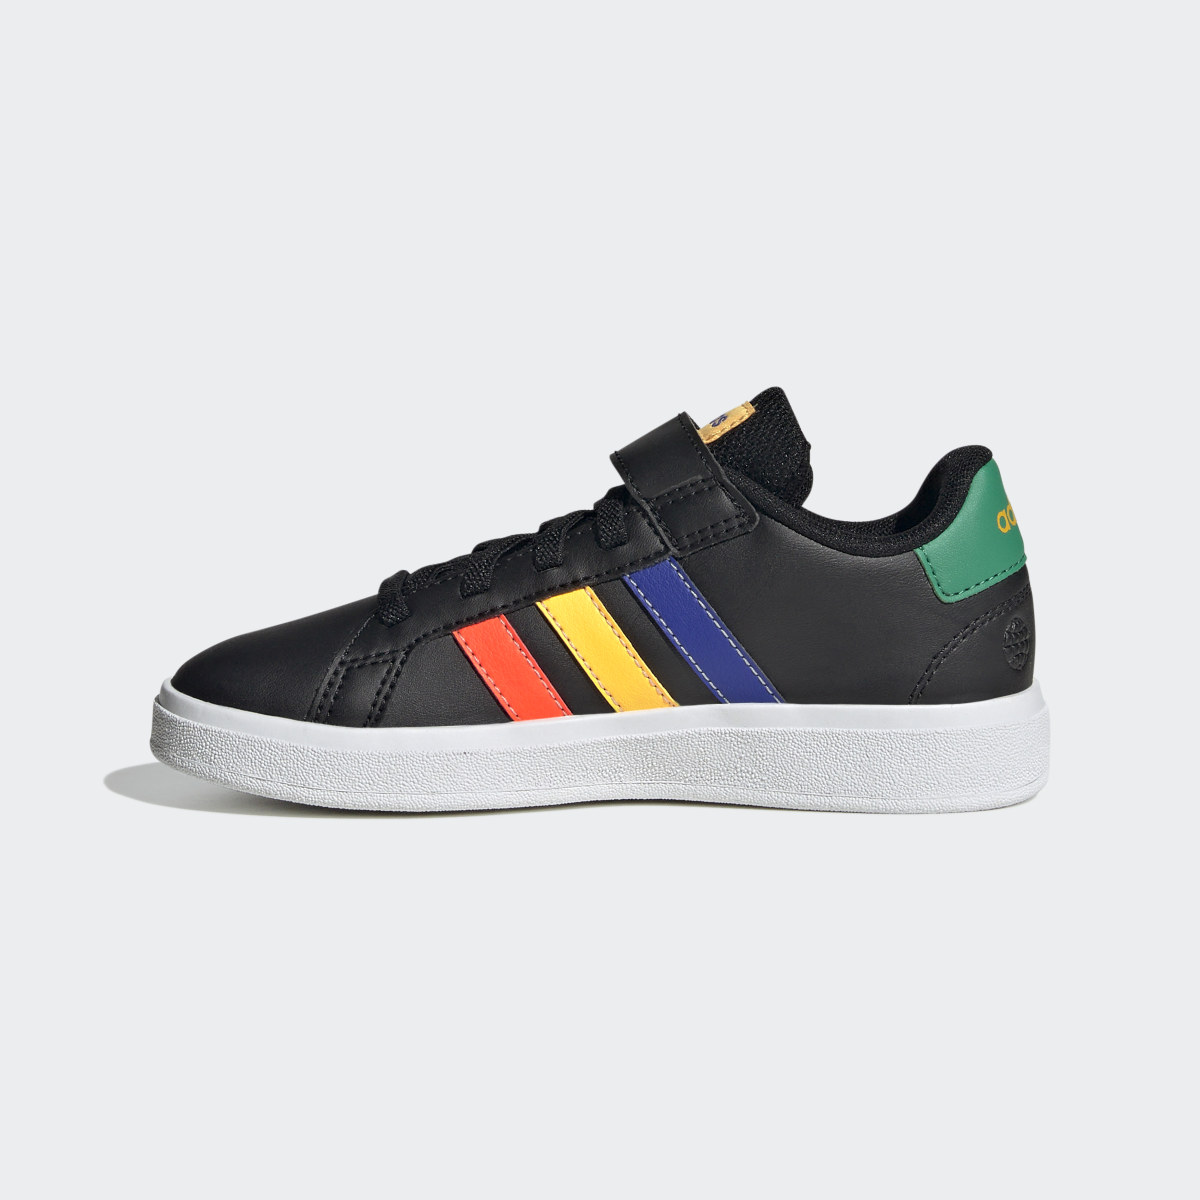 Adidas Grand Court Court Elastic Lace and Top Strap Shoes. 7